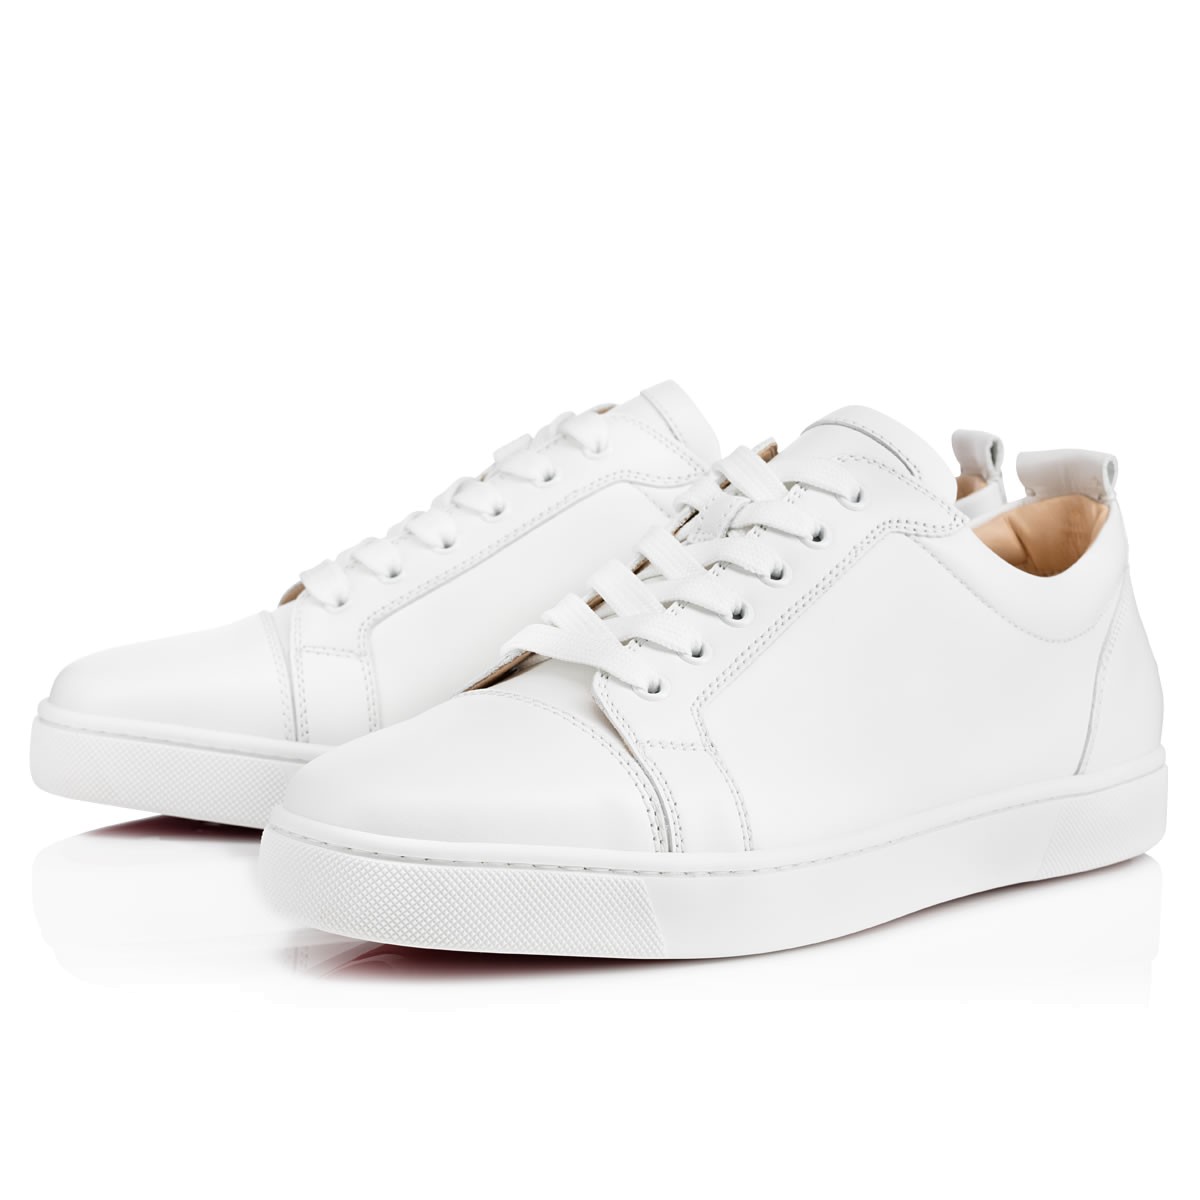 louboutin homme chaussure blanche